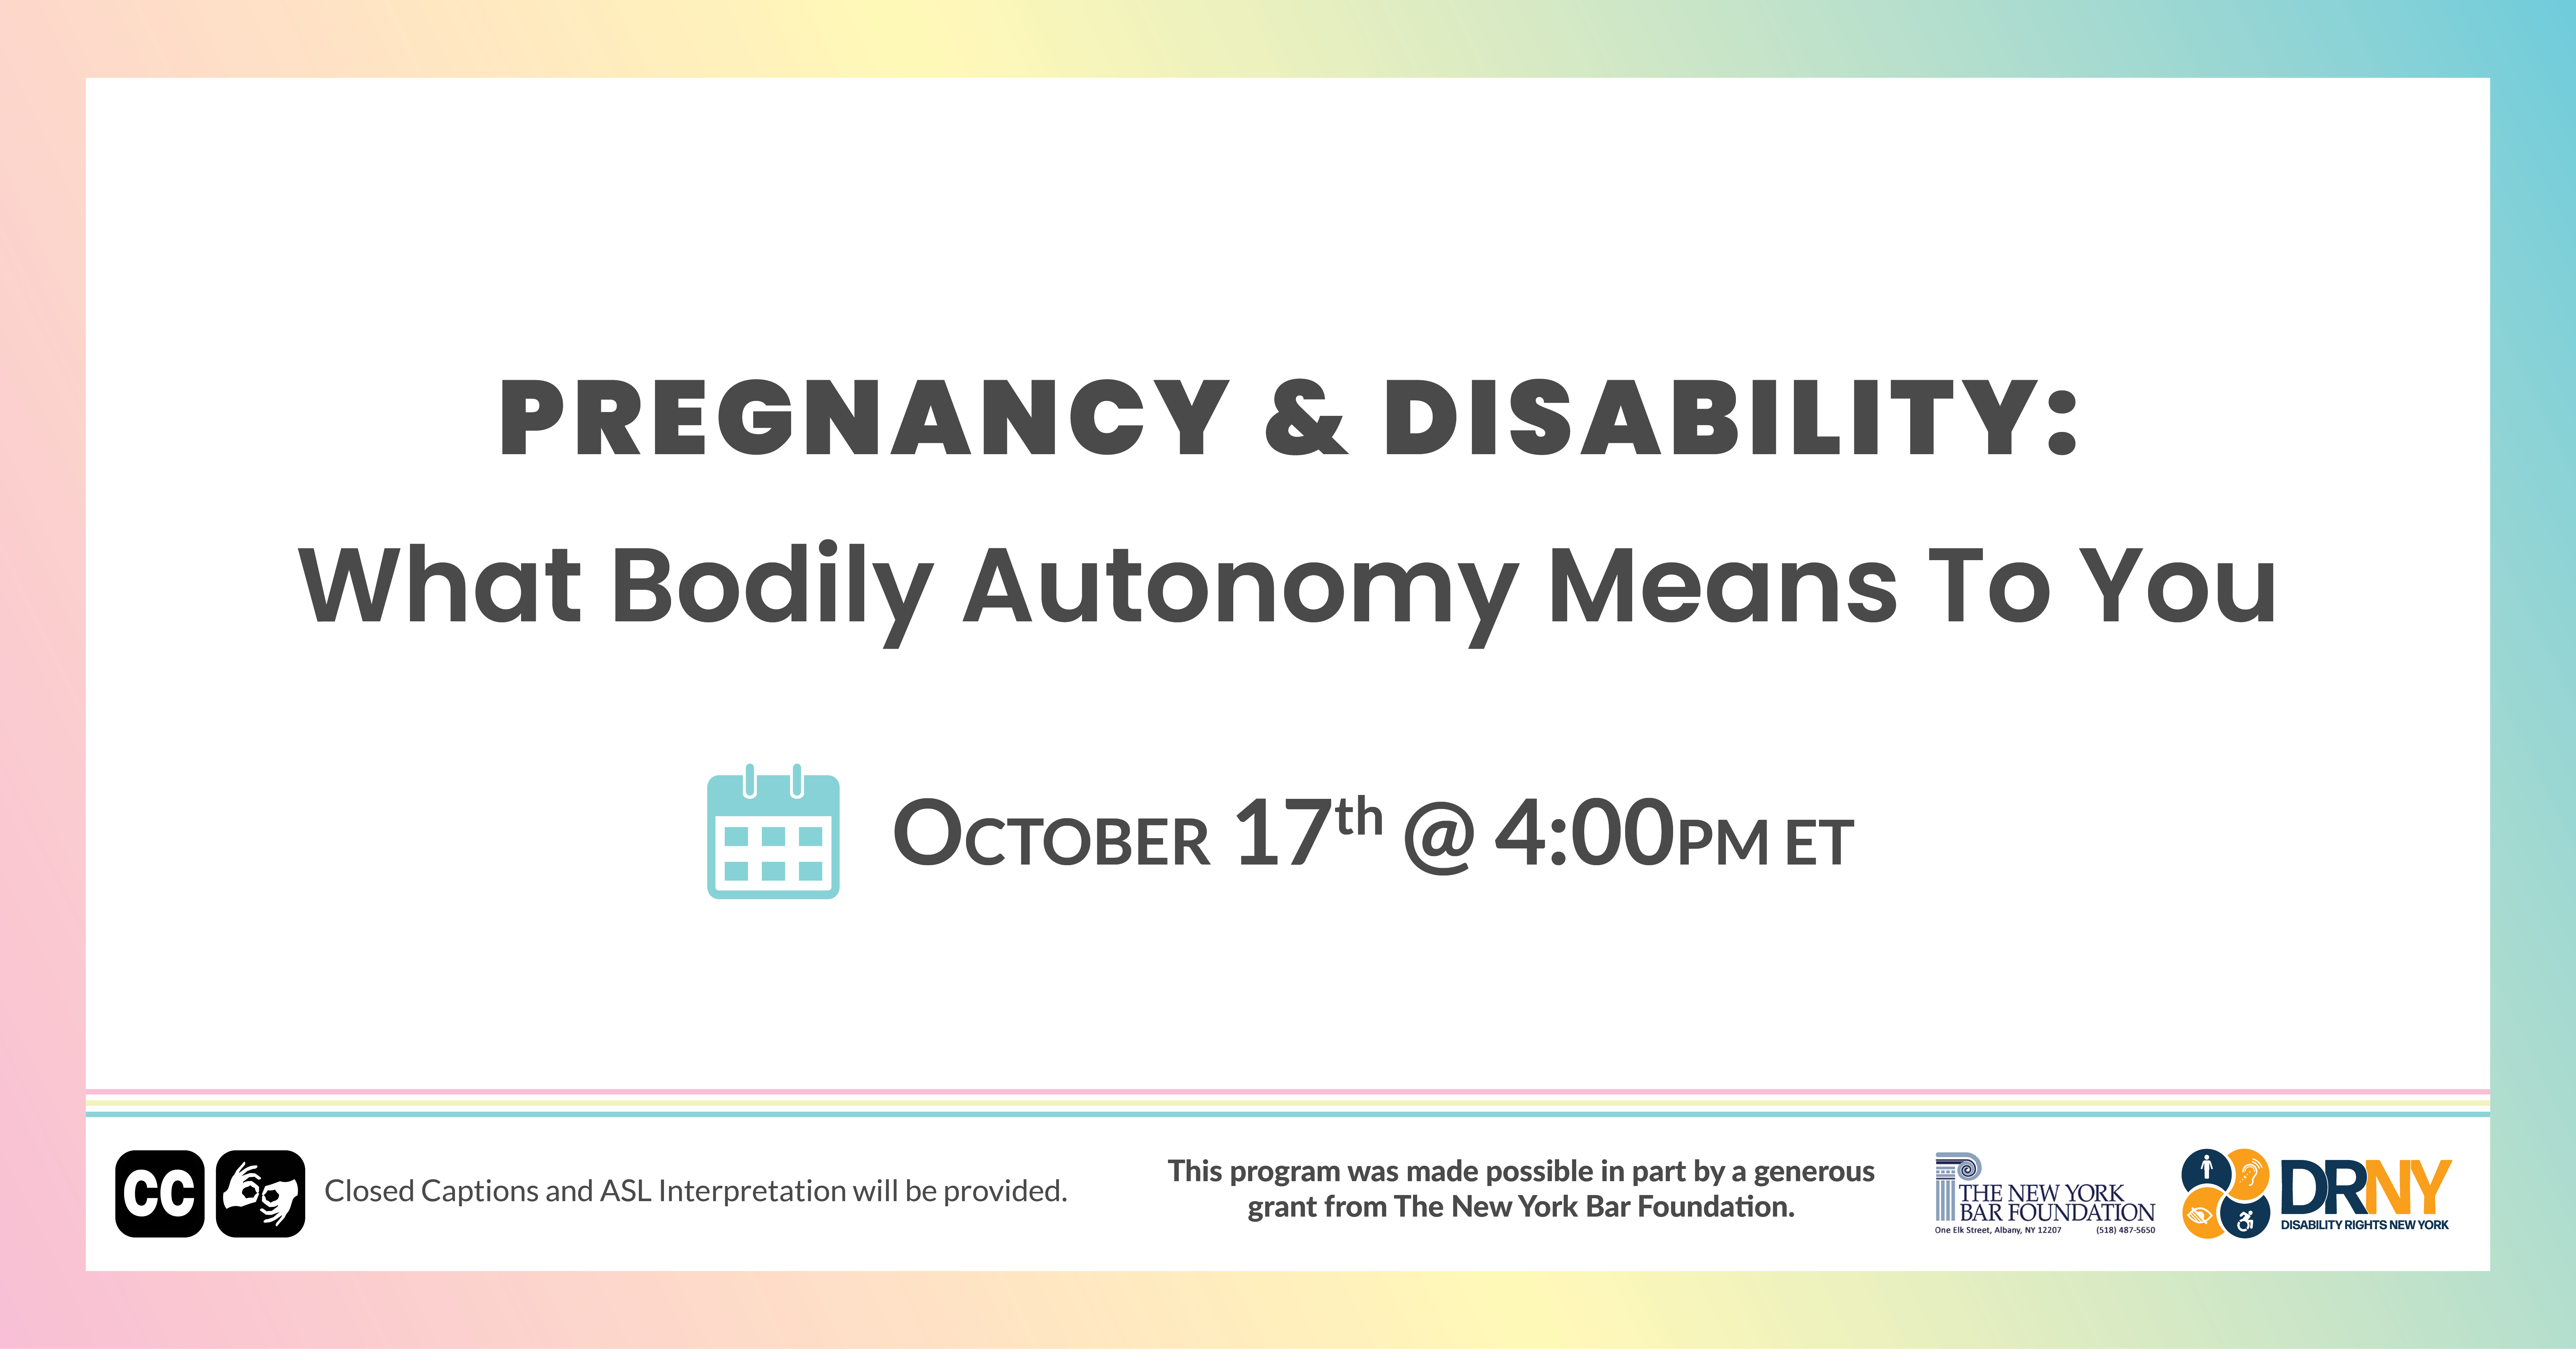 Pregnancy and Disability: What Bodily Autonomy Means to You